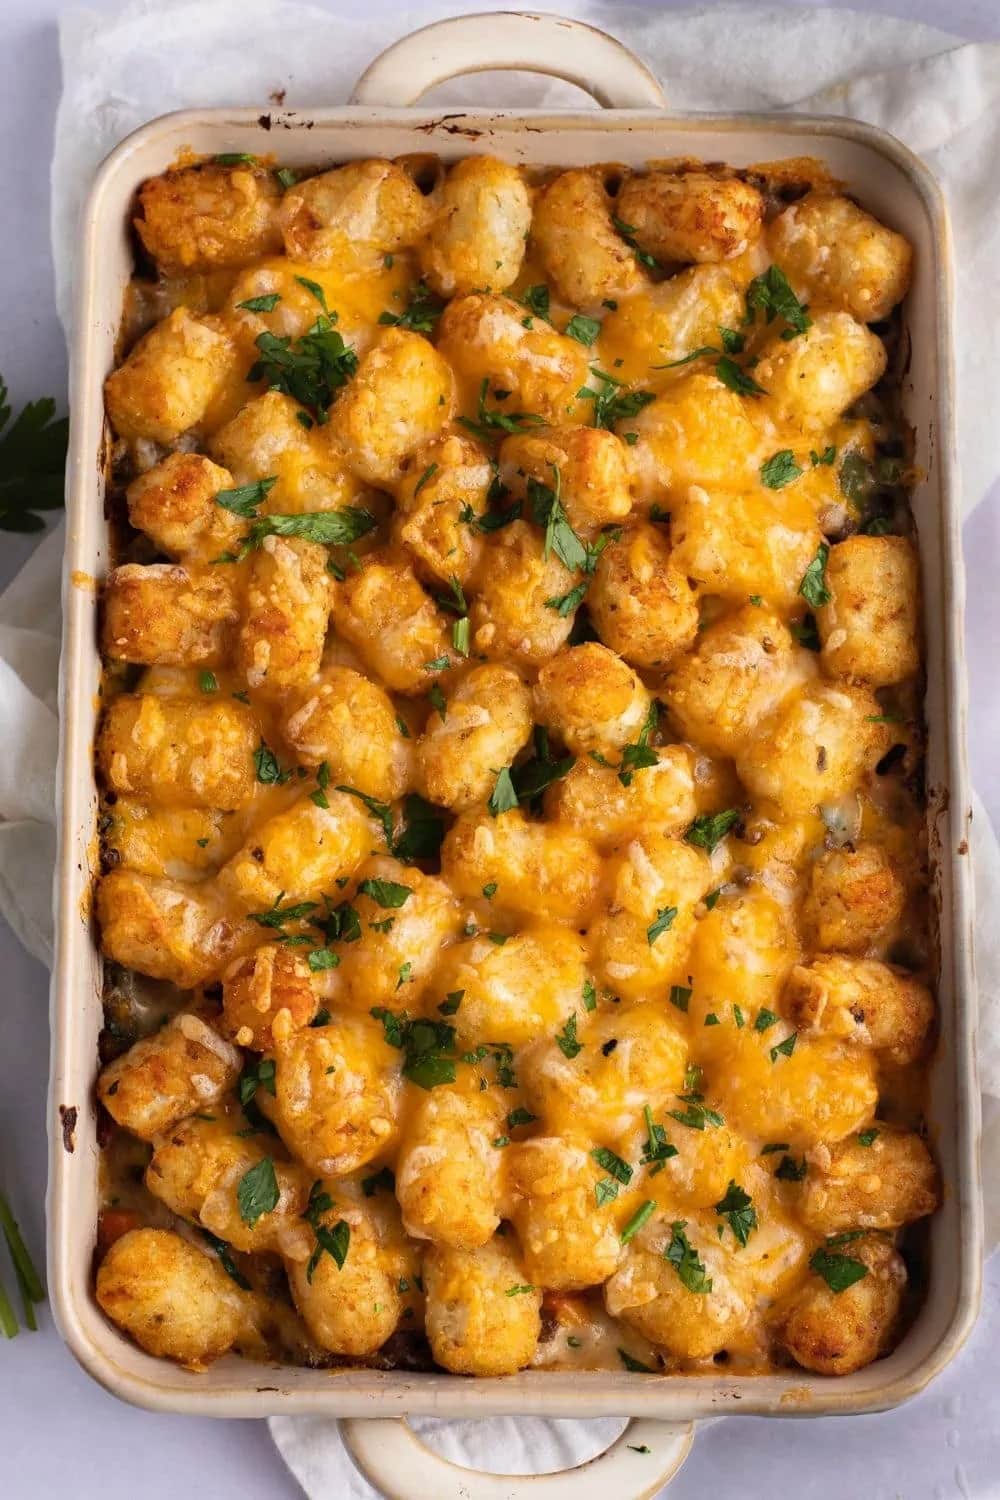 Homemade Tater Tot Casserole with Ground Beef